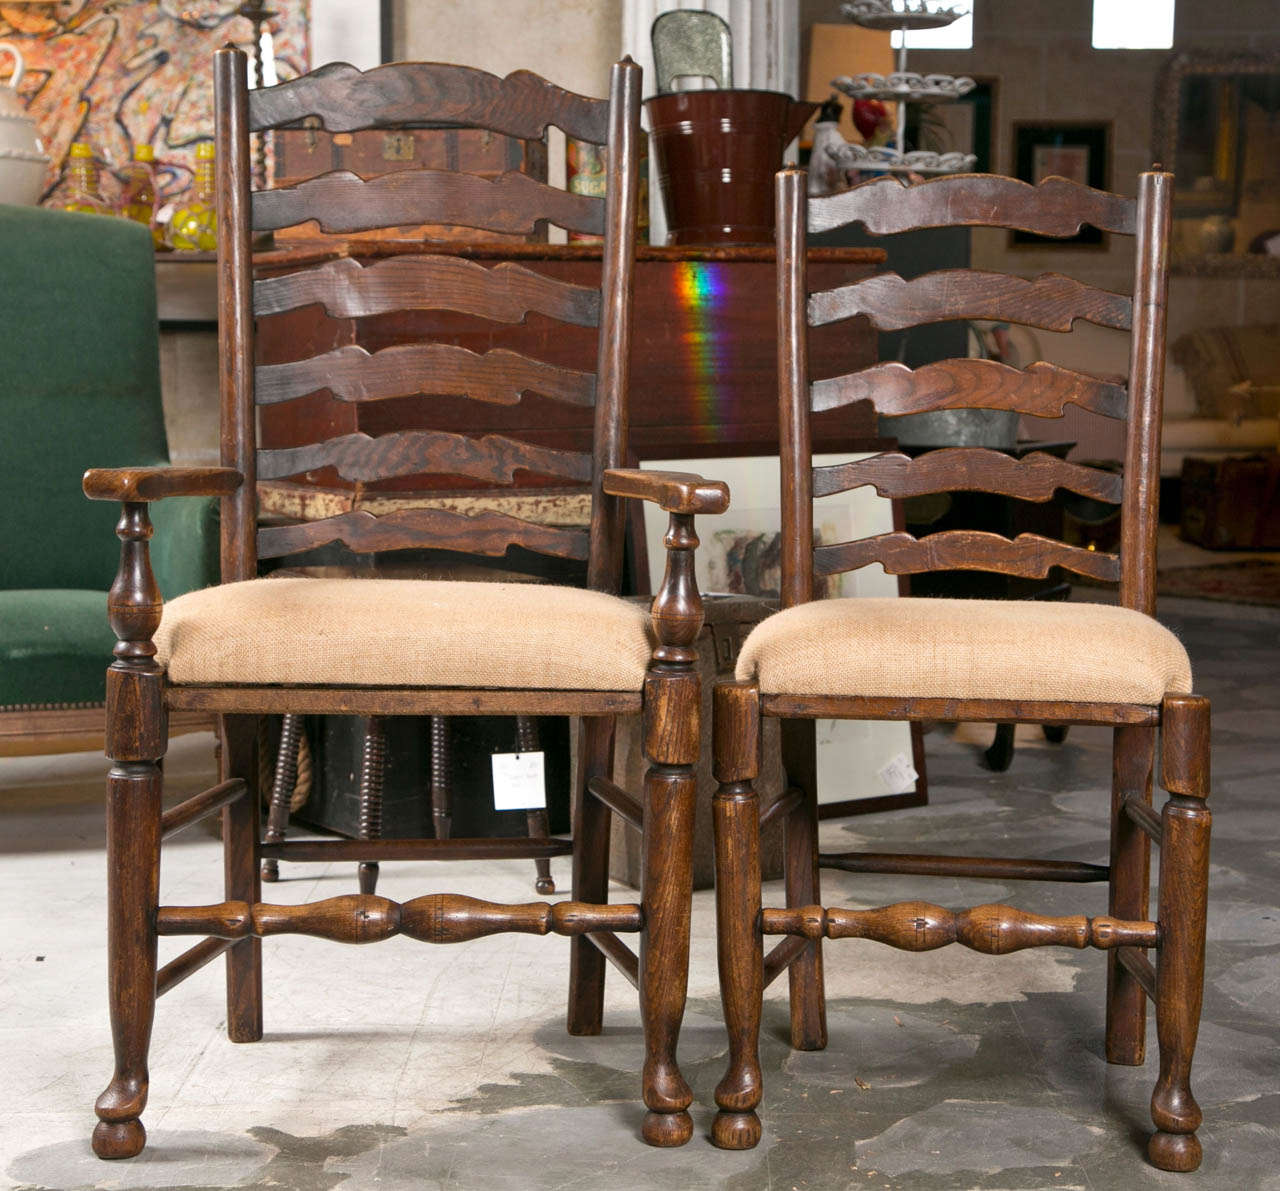 Wonderful set of 6 Lanchestershire ladderback dining chairs.2 arm and 4 side chairs in very good condition. Rush seats have been replaced with padded burlap seats.
The arm chair measures:
height 43.5